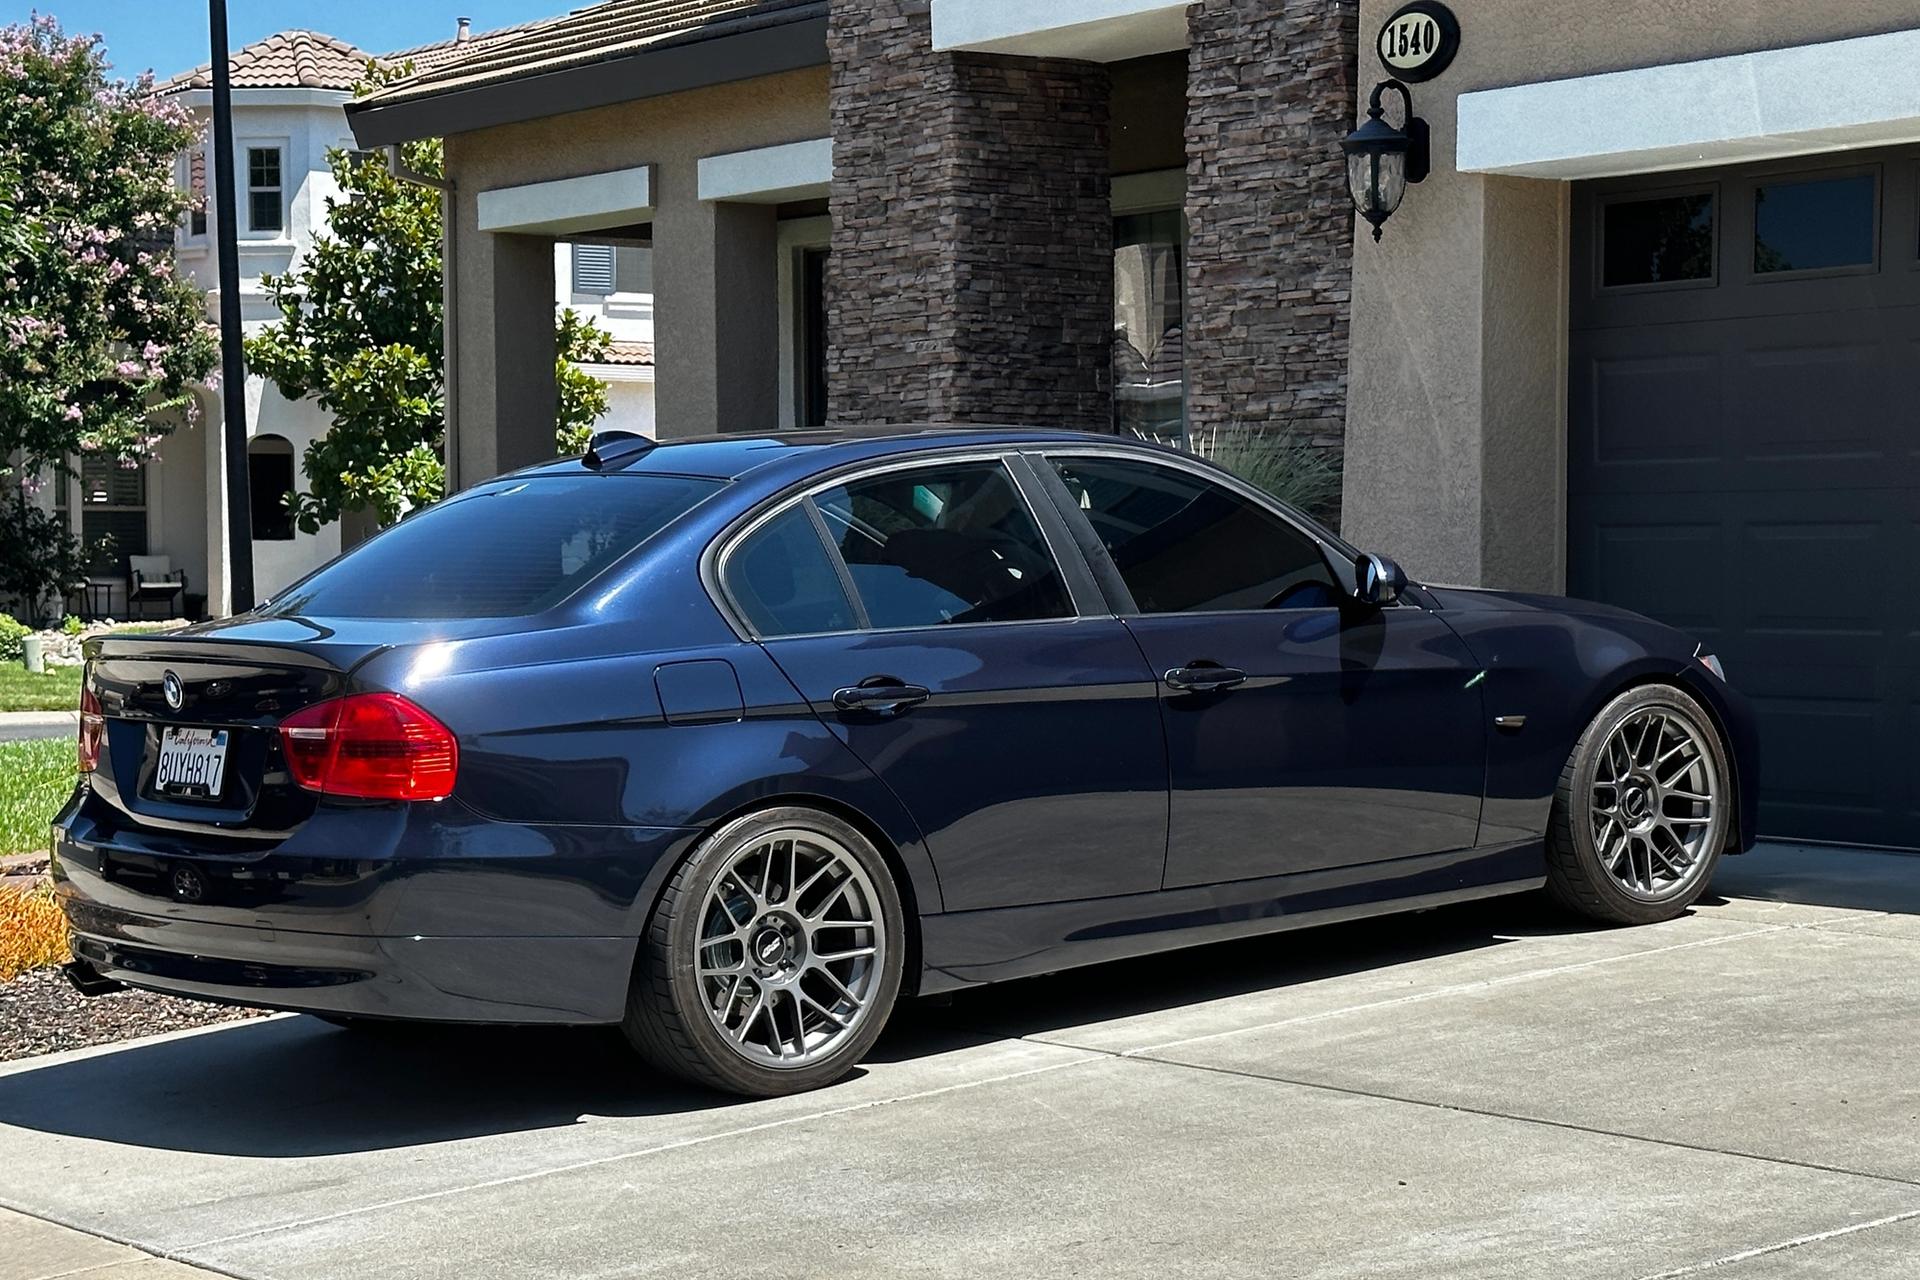 BMW E90 Sedan 3 Series with 18" ARC-8 in Anthracite